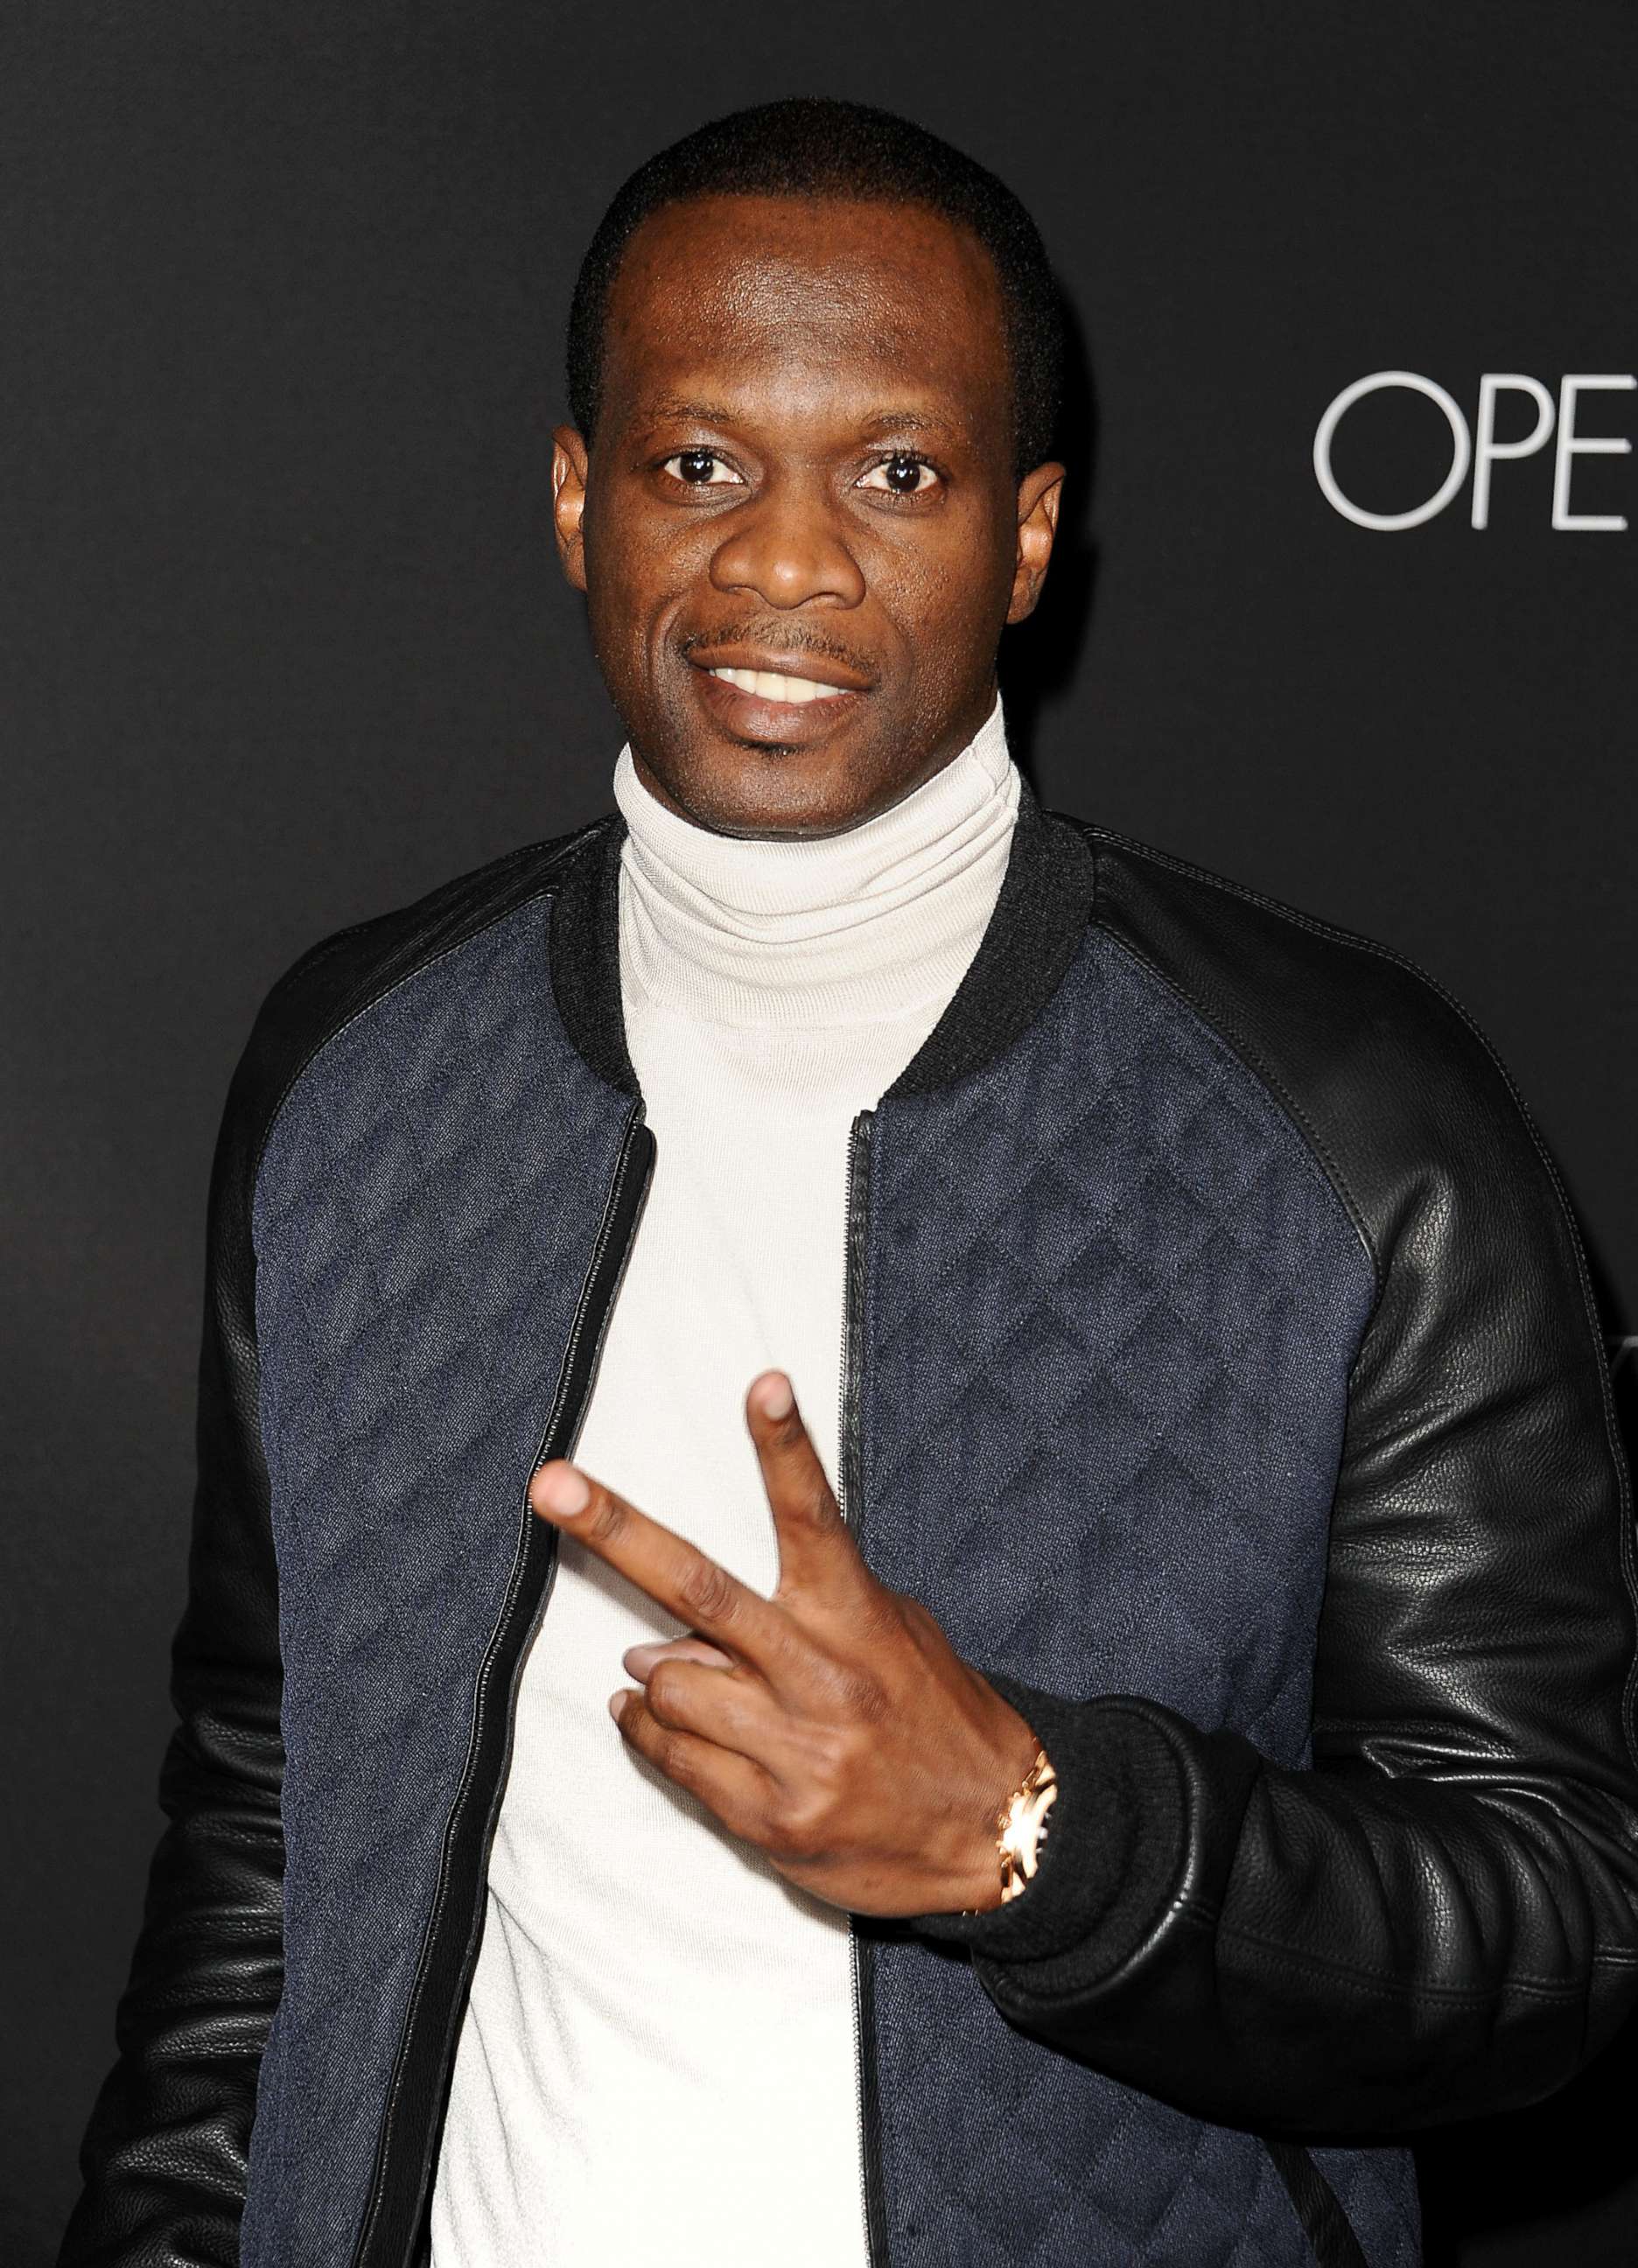 PHOTO: Pras attends the premiere of "Fifty Shades of Black" at Regal Cinemas L.A. Live, Jan. 26, 2016, in Los Angeles.